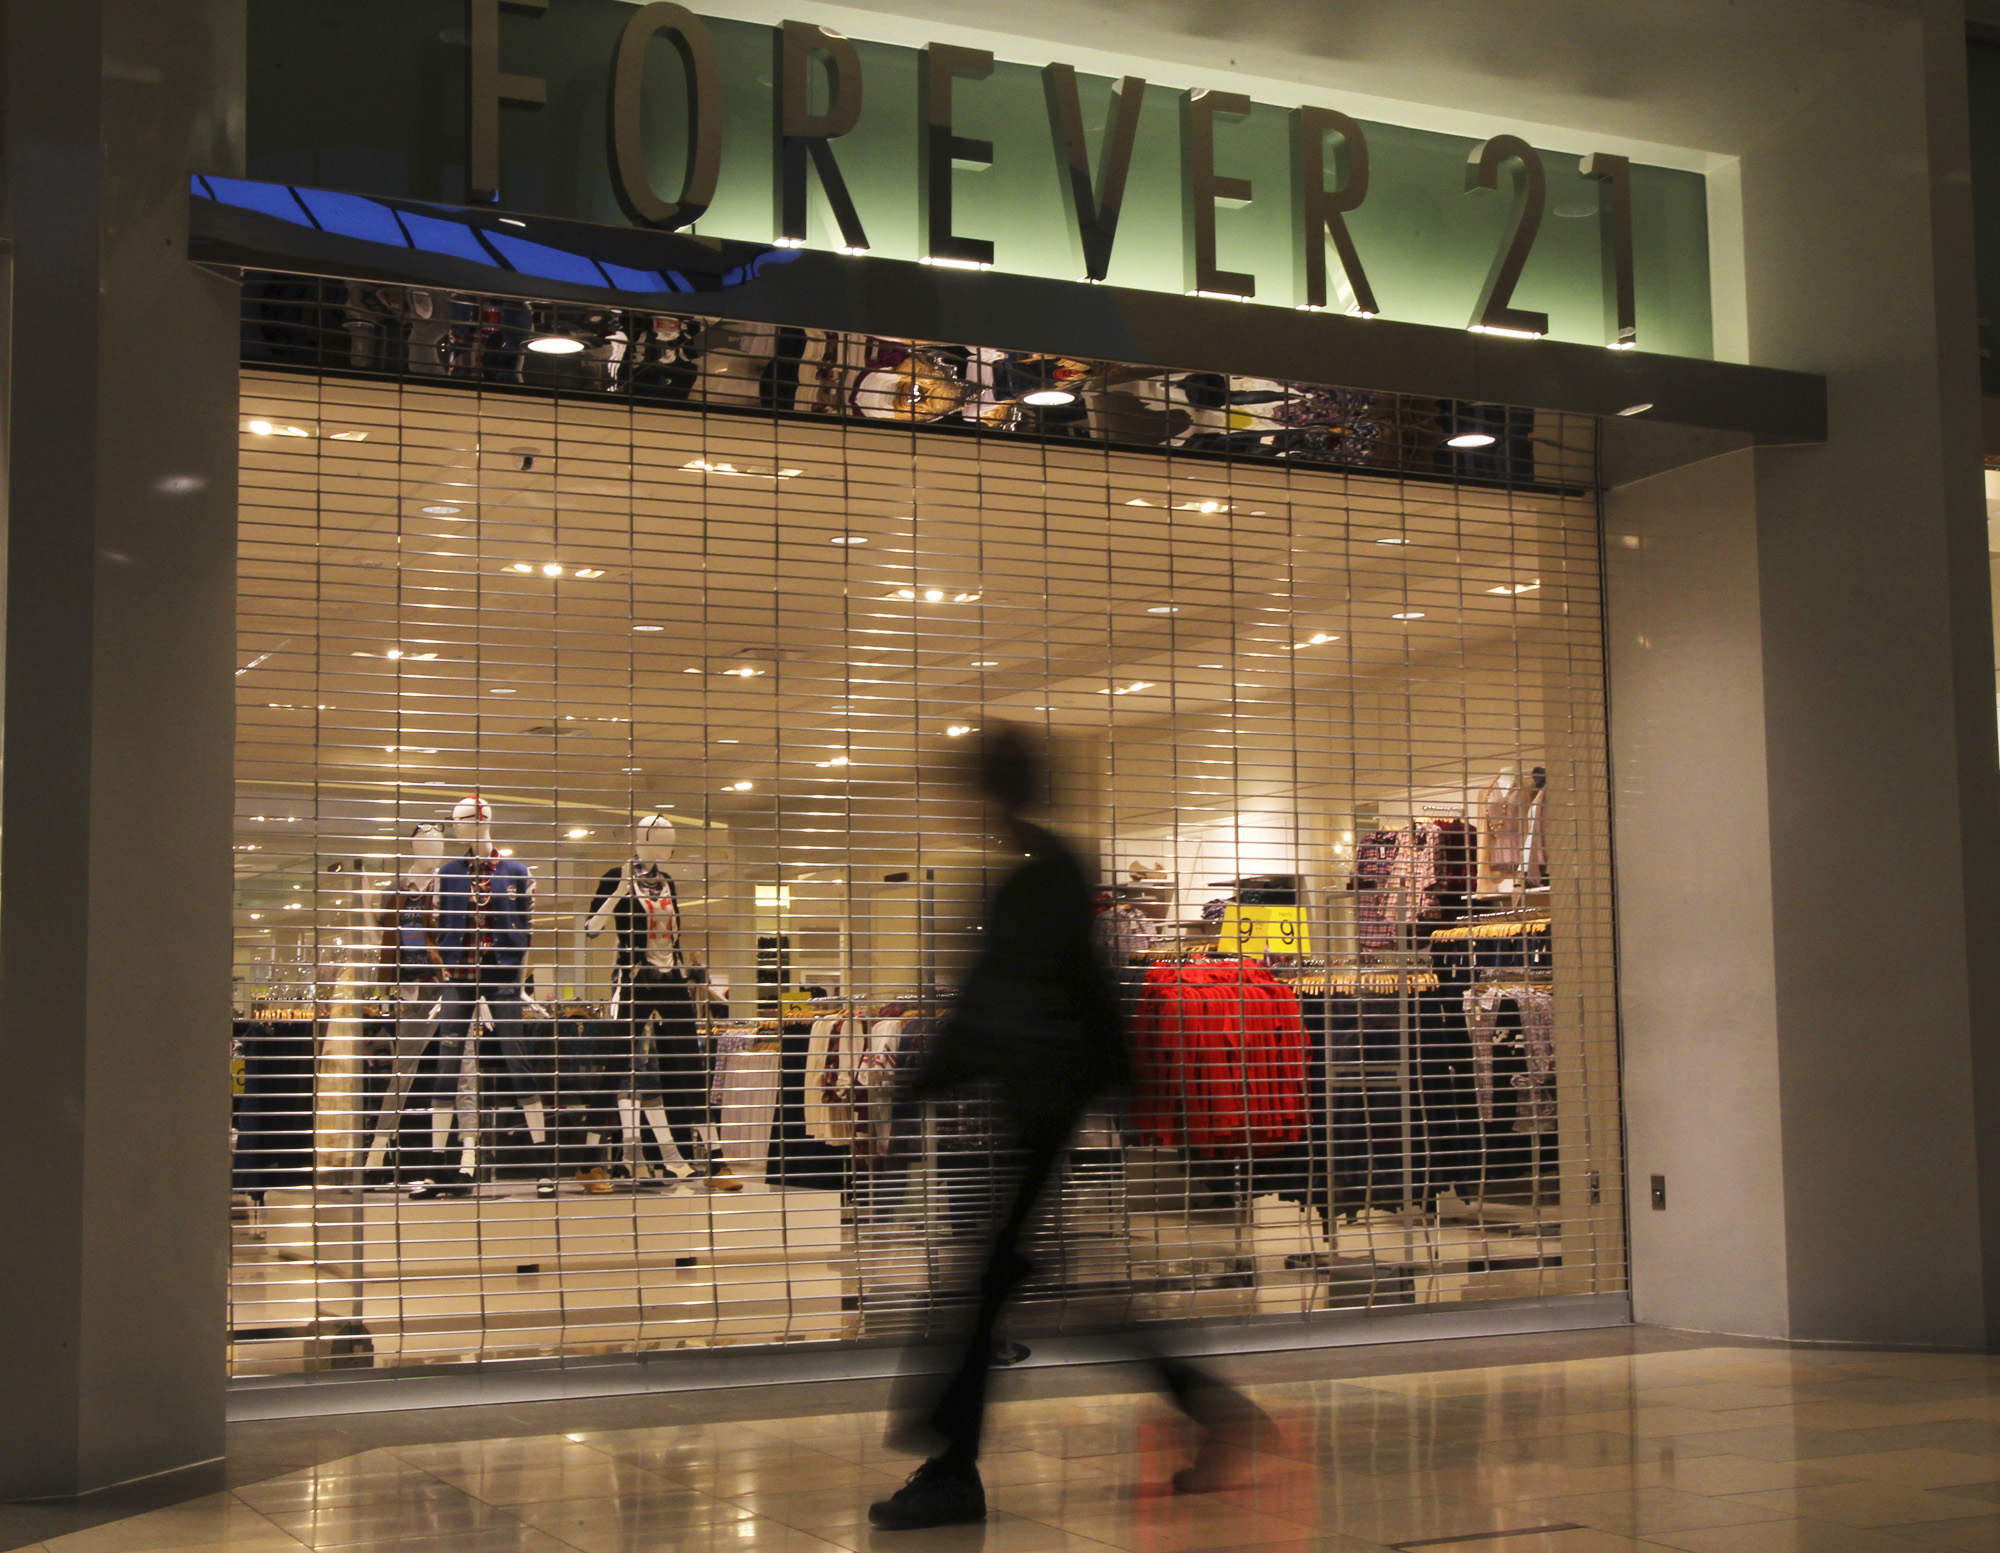 Here's the list of Forever 21 stores closing in Texas